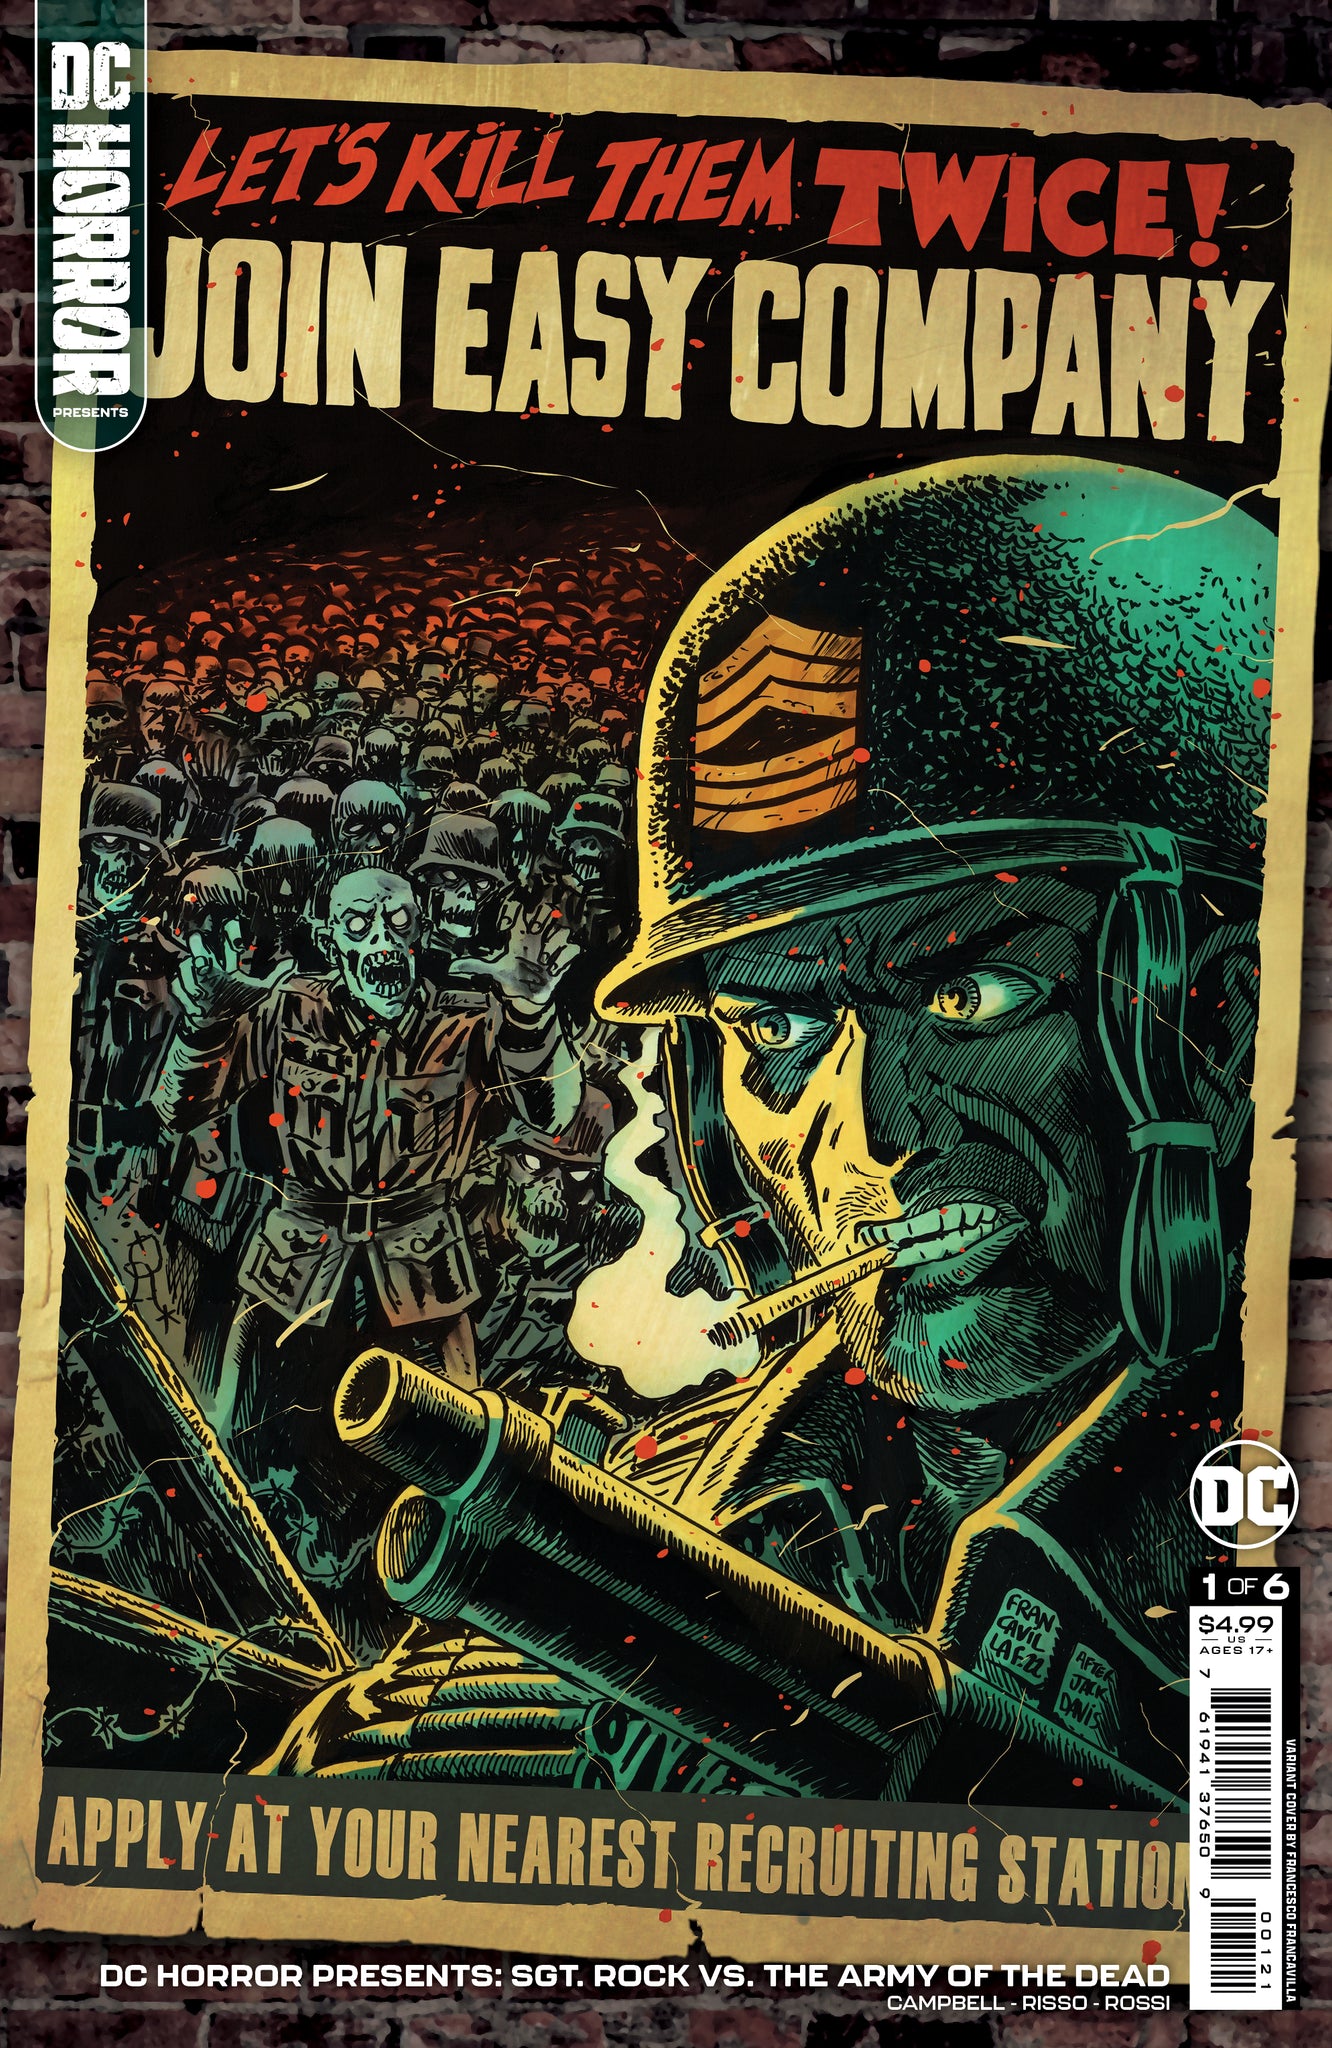 DC HORROR PRESENTS SGT ROCK VS THE ARMY OF THE DEAD #1 (OF 6)